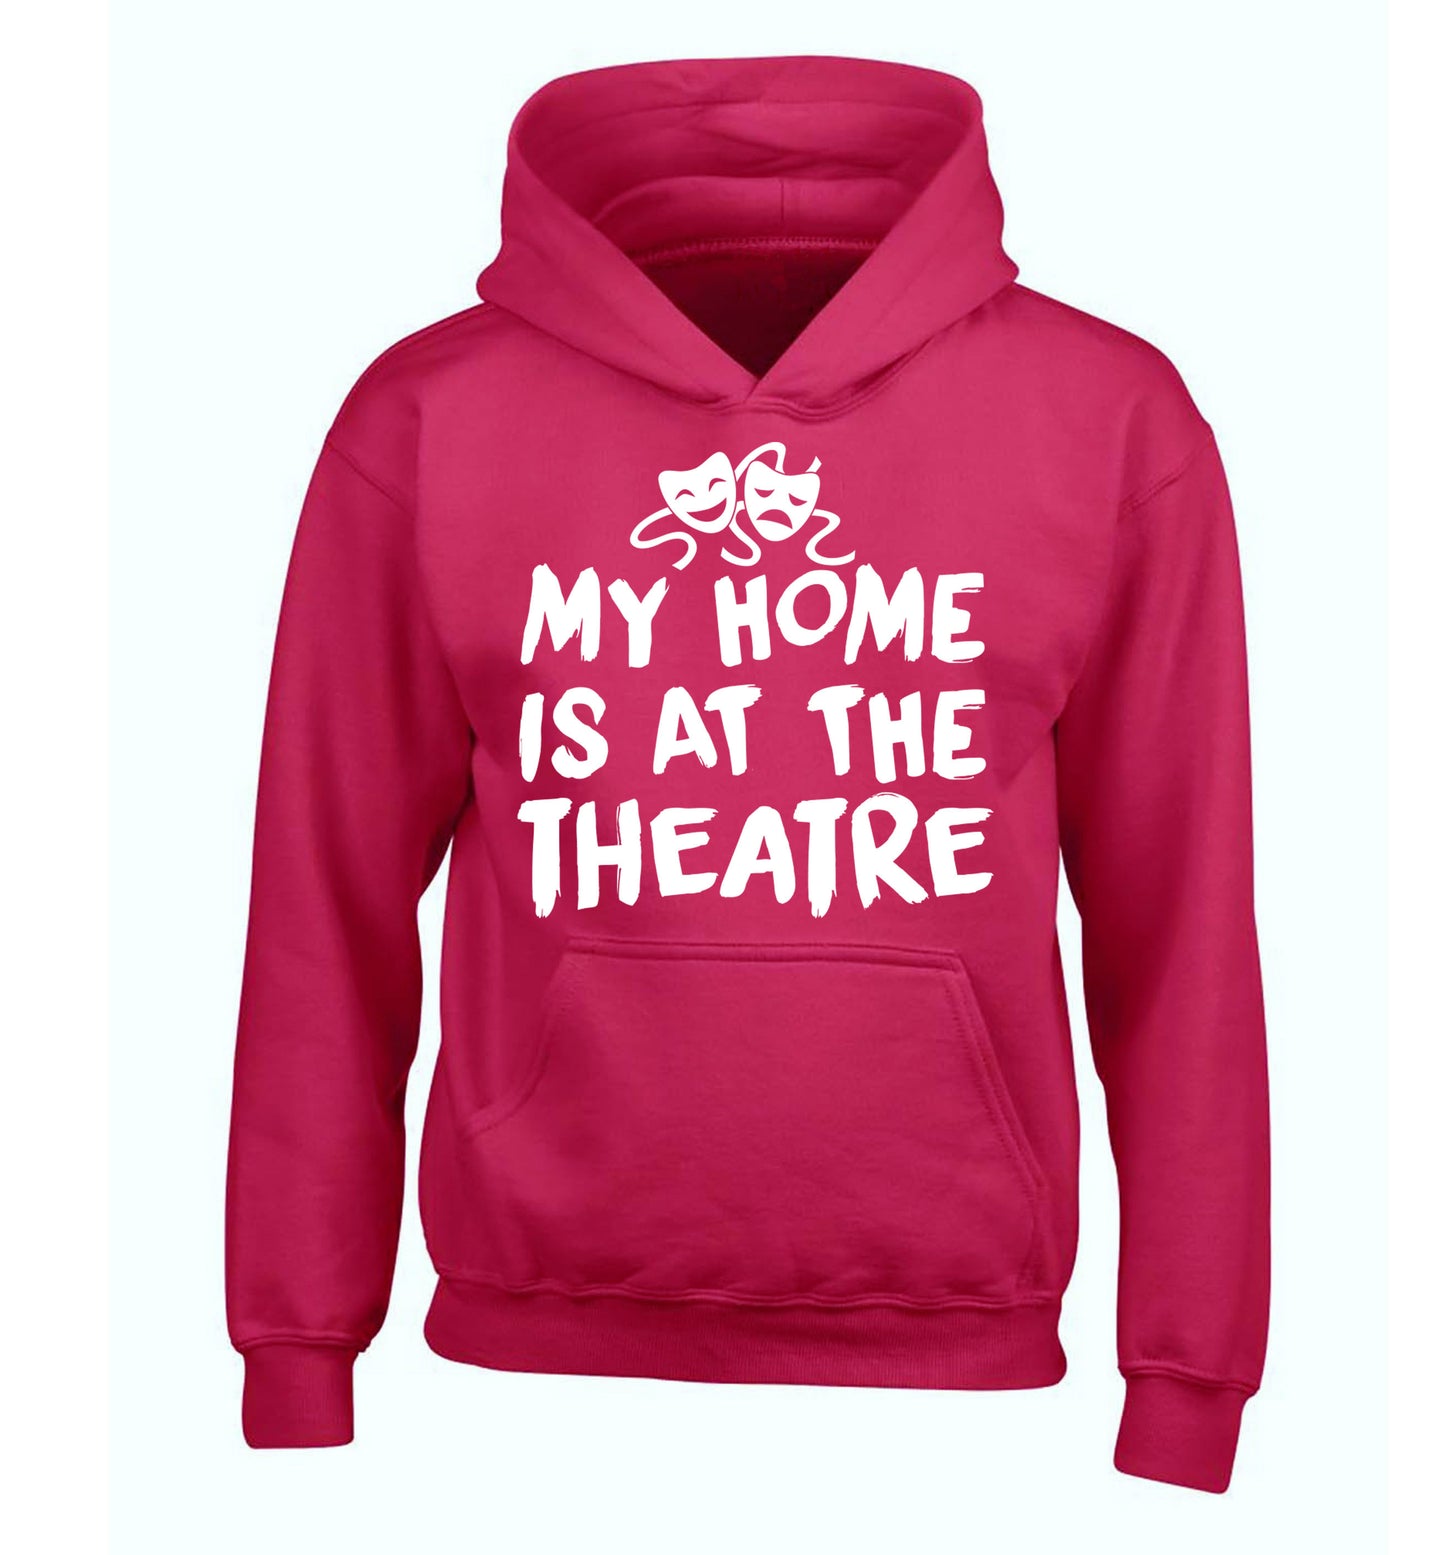 My home is at the theatre children's pink hoodie 12-14 Years